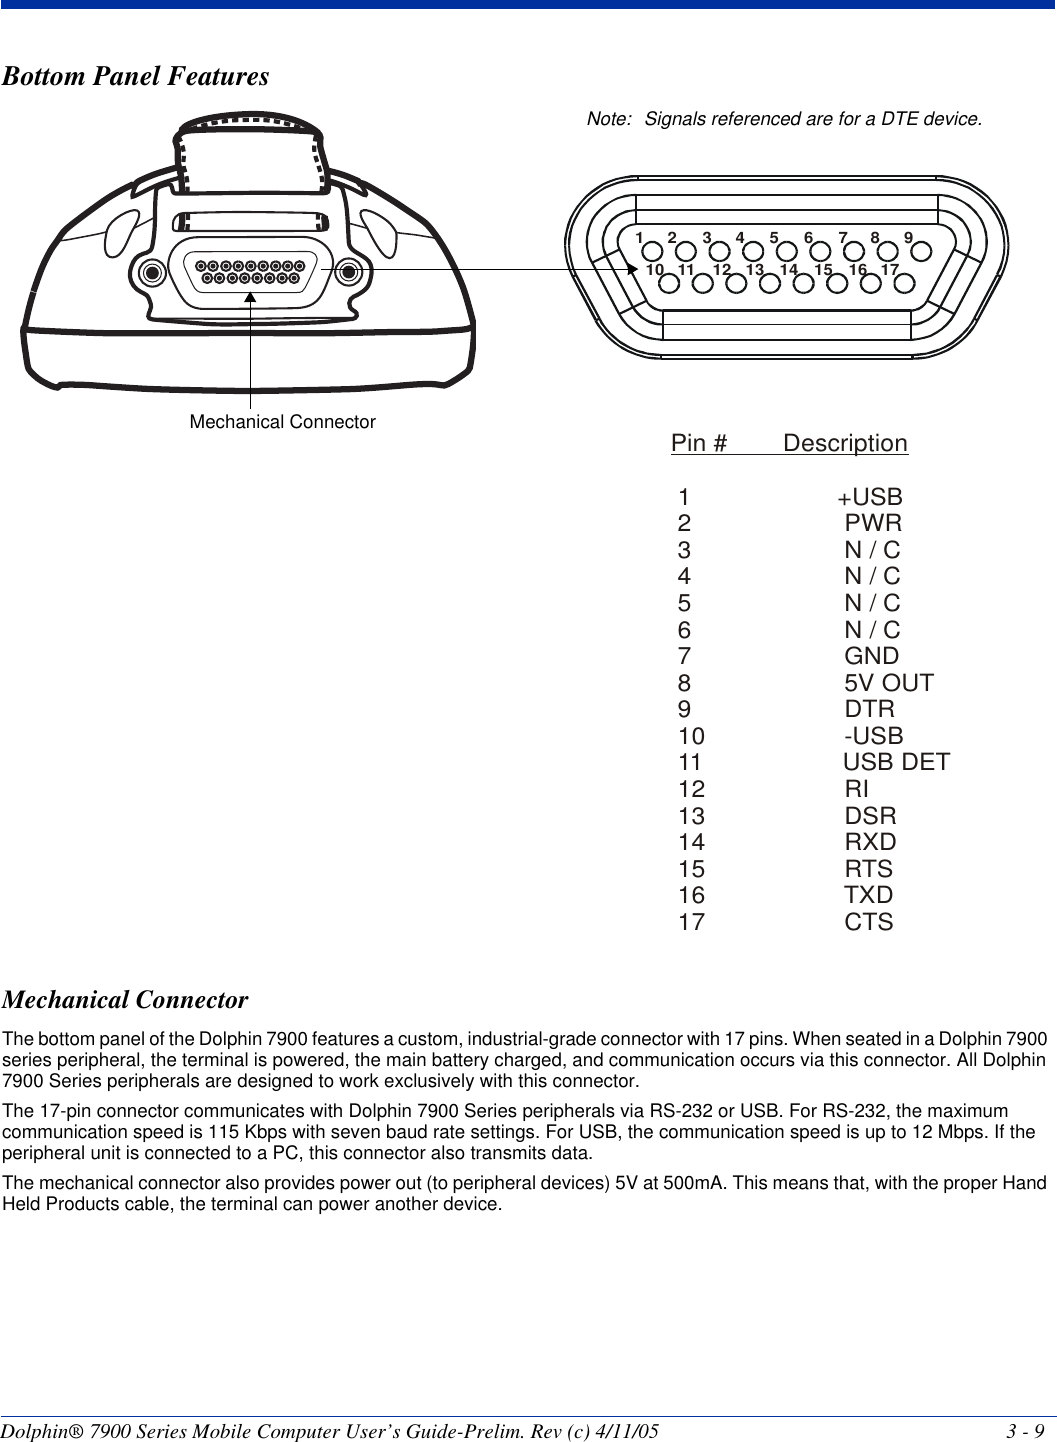 Dolphin® 7900 Series Mobile Computer User’s Guide-Prelim. Rev (c) 4/11/05 3 - 9Bottom Panel FeaturesMechanical ConnectorThe bottom panel of the Dolphin 7900 features a custom, industrial-grade connector with 17 pins. When seated in a Dolphin 7900 series peripheral, the terminal is powered, the main battery charged, and communication occurs via this connector. All Dolphin 7900 Series peripherals are designed to work exclusively with this connector.The 17-pin connector communicates with Dolphin 7900 Series peripherals via RS-232 or USB. For RS-232, the maximum communication speed is 115 Kbps with seven baud rate settings. For USB, the communication speed is up to 12 Mbps. If the peripheral unit is connected to a PC, this connector also transmits data. The mechanical connector also provides power out (to peripheral devices) 5V at 500mA. This means that, with the proper Hand Held Products cable, the terminal can power another device. Pin #        Description 1                     +USB 2                      PWR 3                      N / C 4                      N / C 5                      N / C 6                      N / C 7                      GND 8                      5V OUT 9                      DTR 10                    -USB  11                    USB DET  12                    RI 13                    DSR 14                    RXD 15                    RTS 16                    TXD   17                    CTS1102113124135146157168179Mechanical ConnectorNote: Signals referenced are for a DTE device.